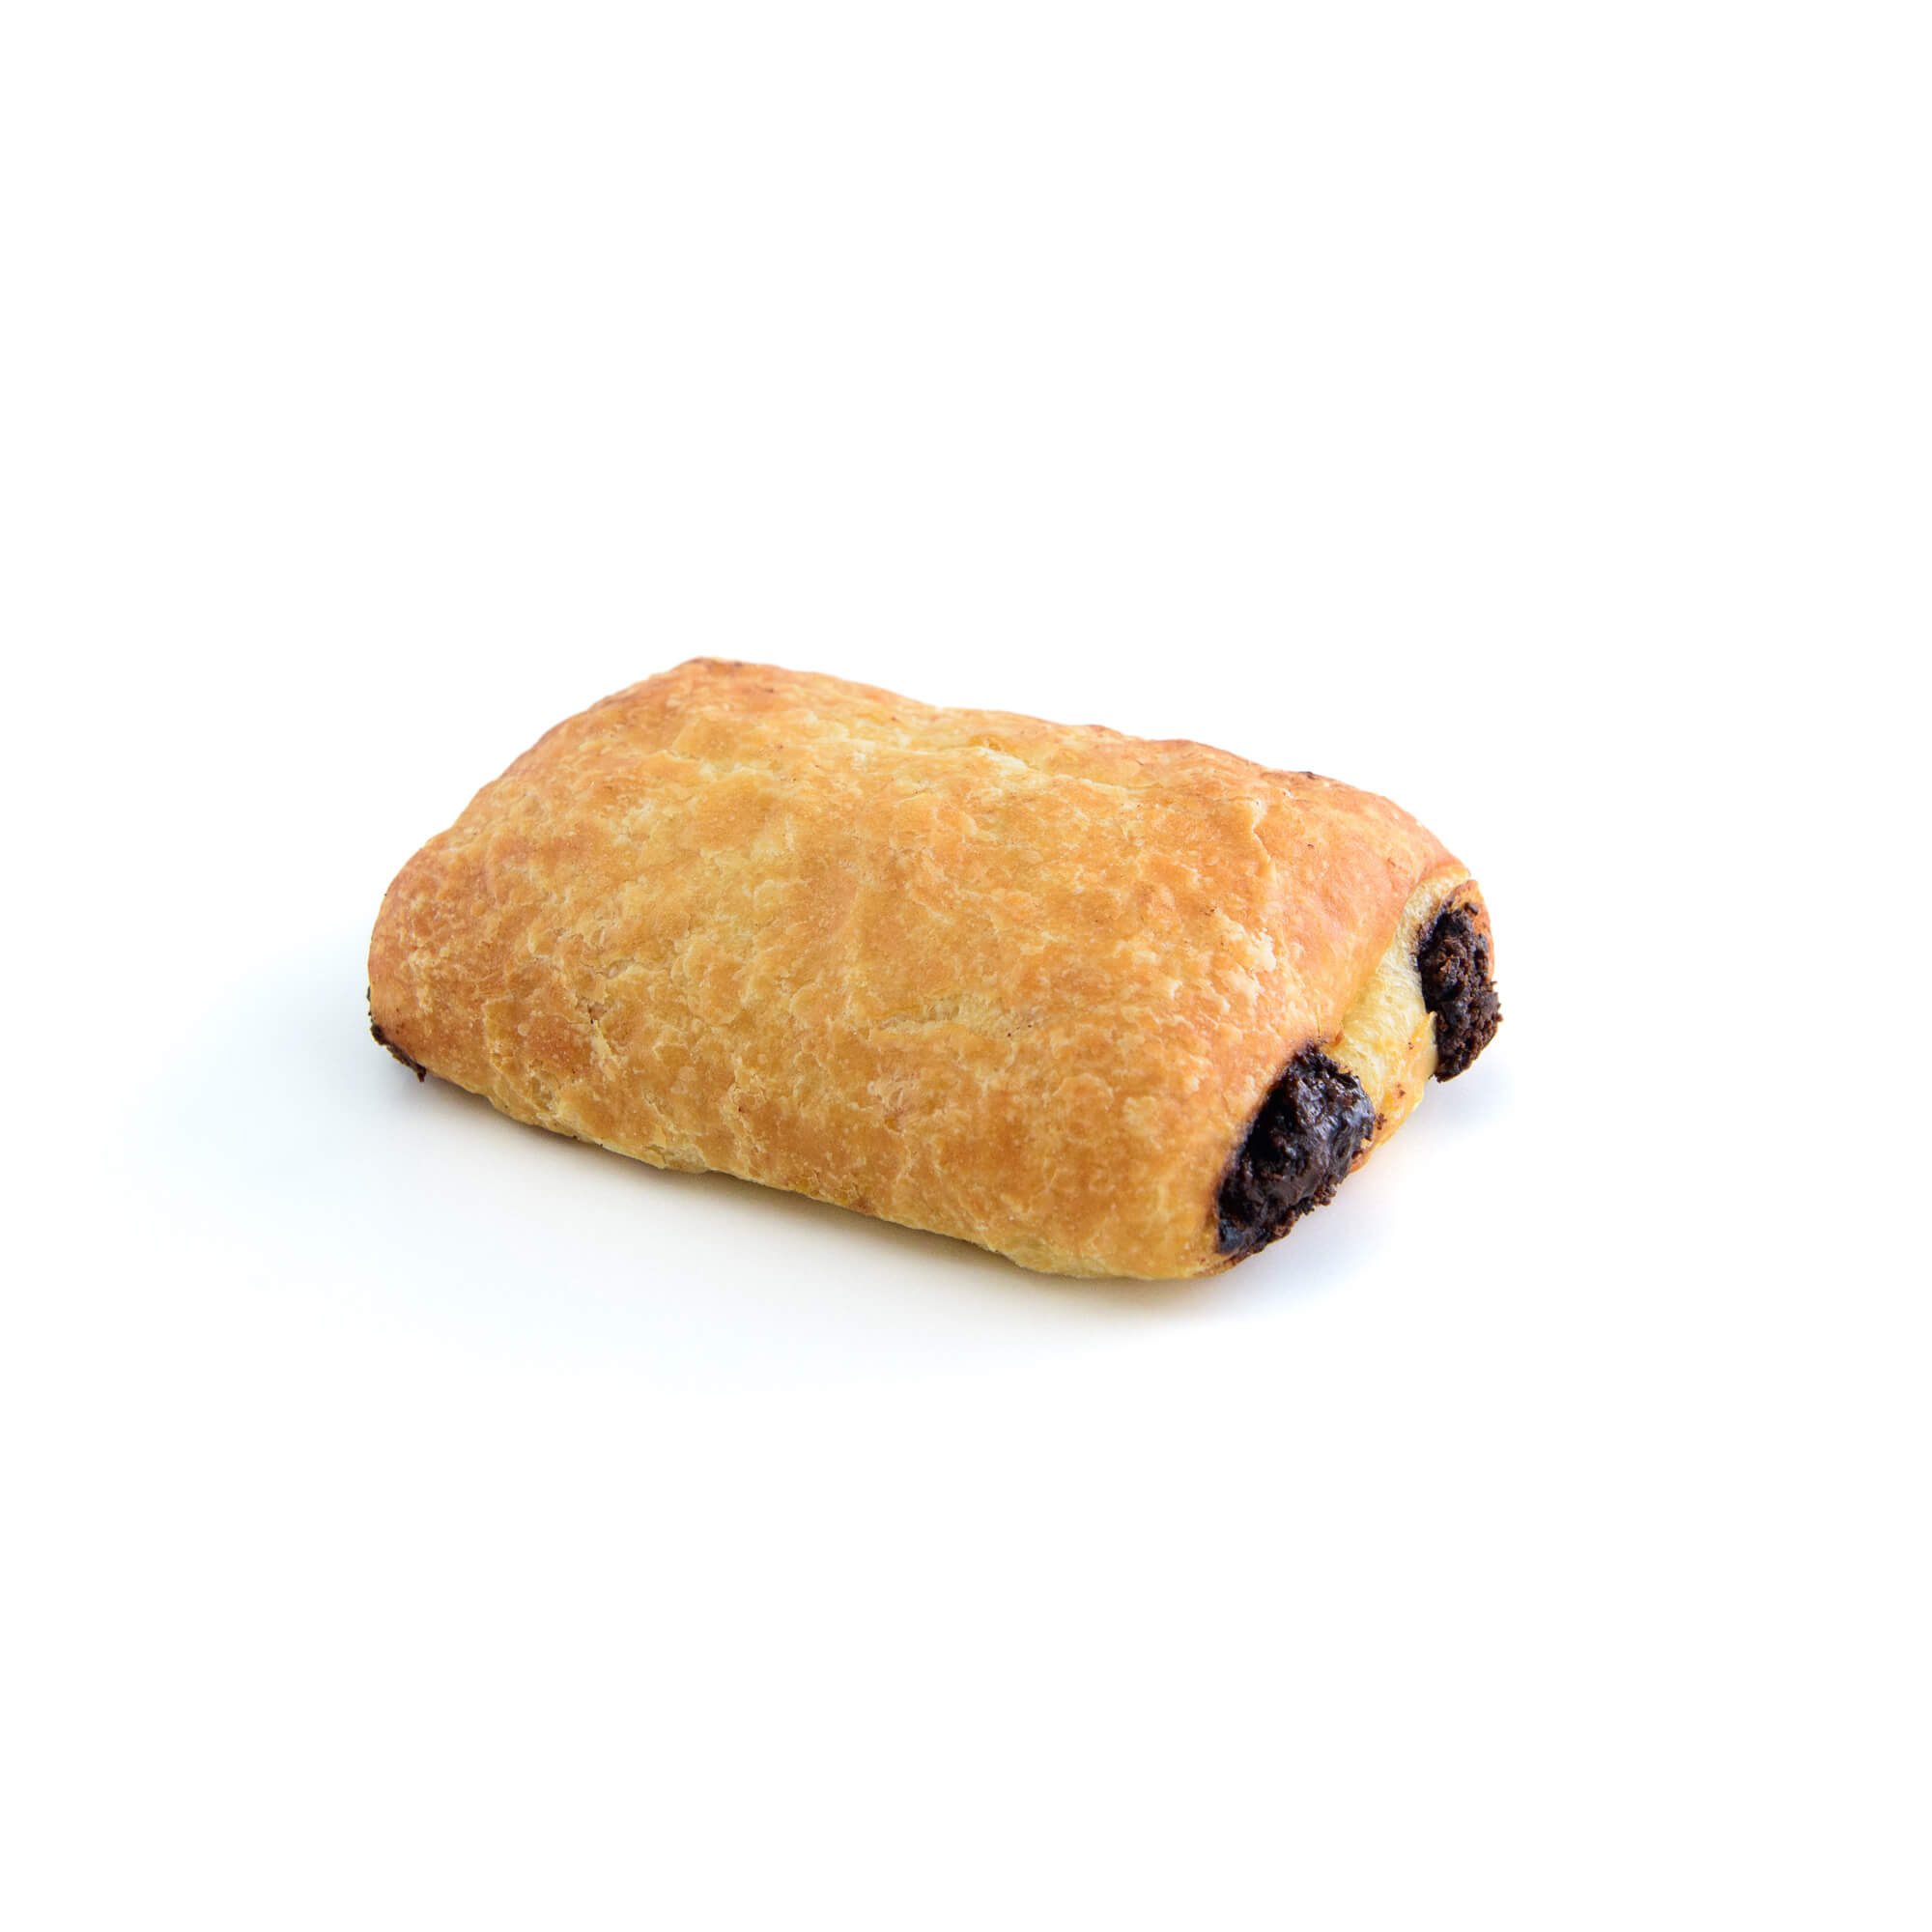 Baked Chocolate Croissant